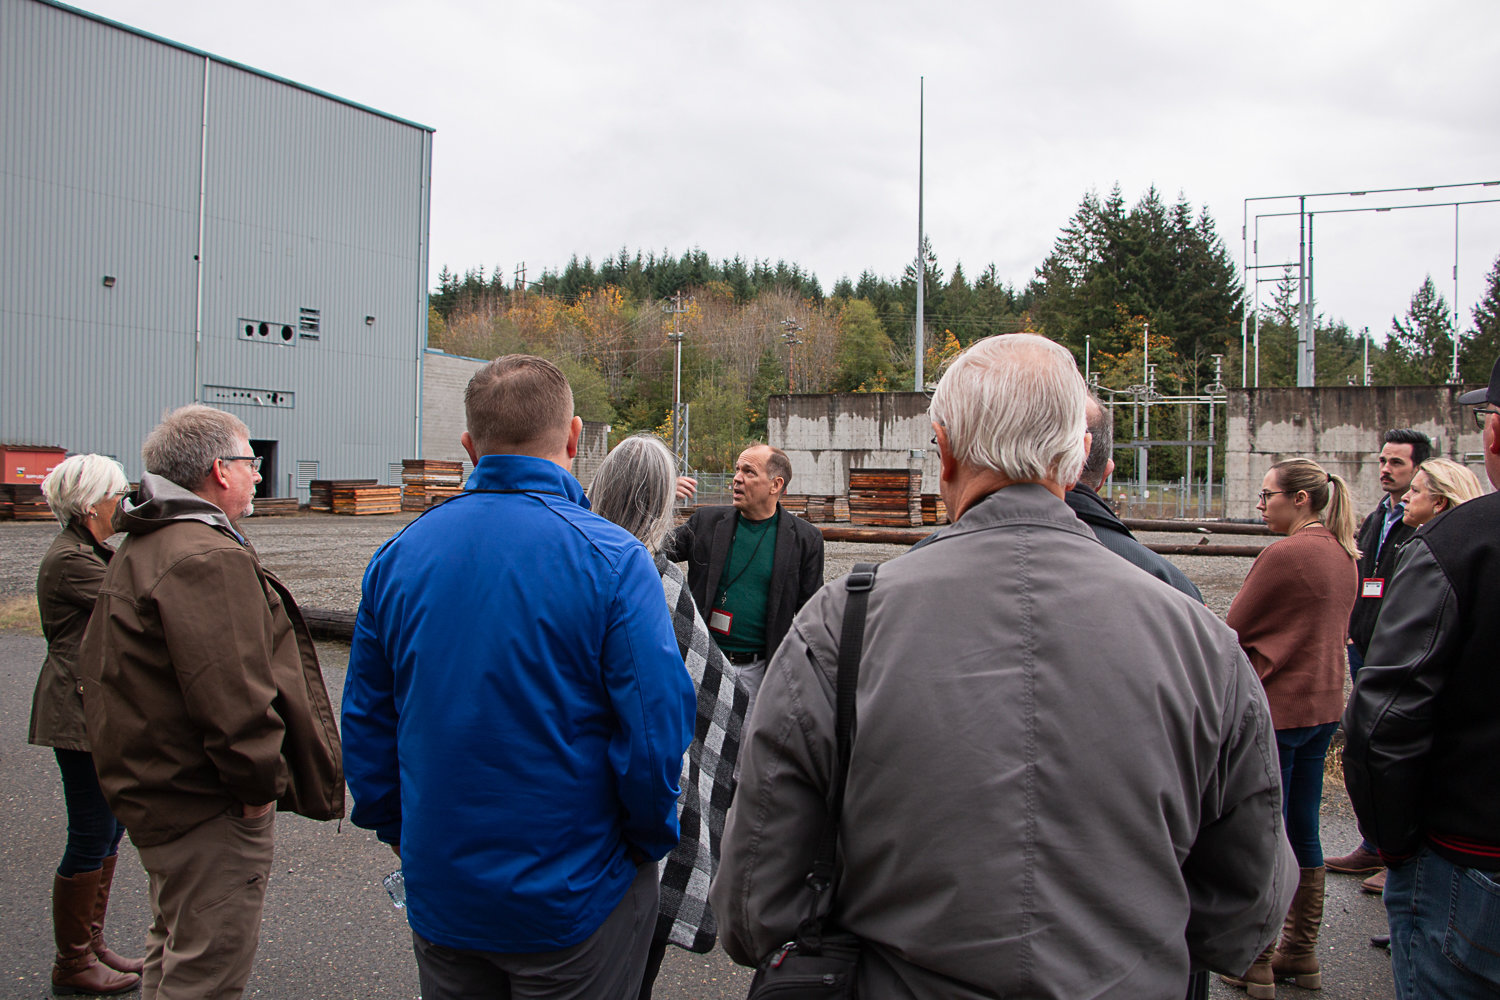 Zap Energy Vice President of Product Ryan Umstattd walks attendees through the Big Hanaford site on Tuesday morning following a presentation he gave explaining his company's fusion technology.